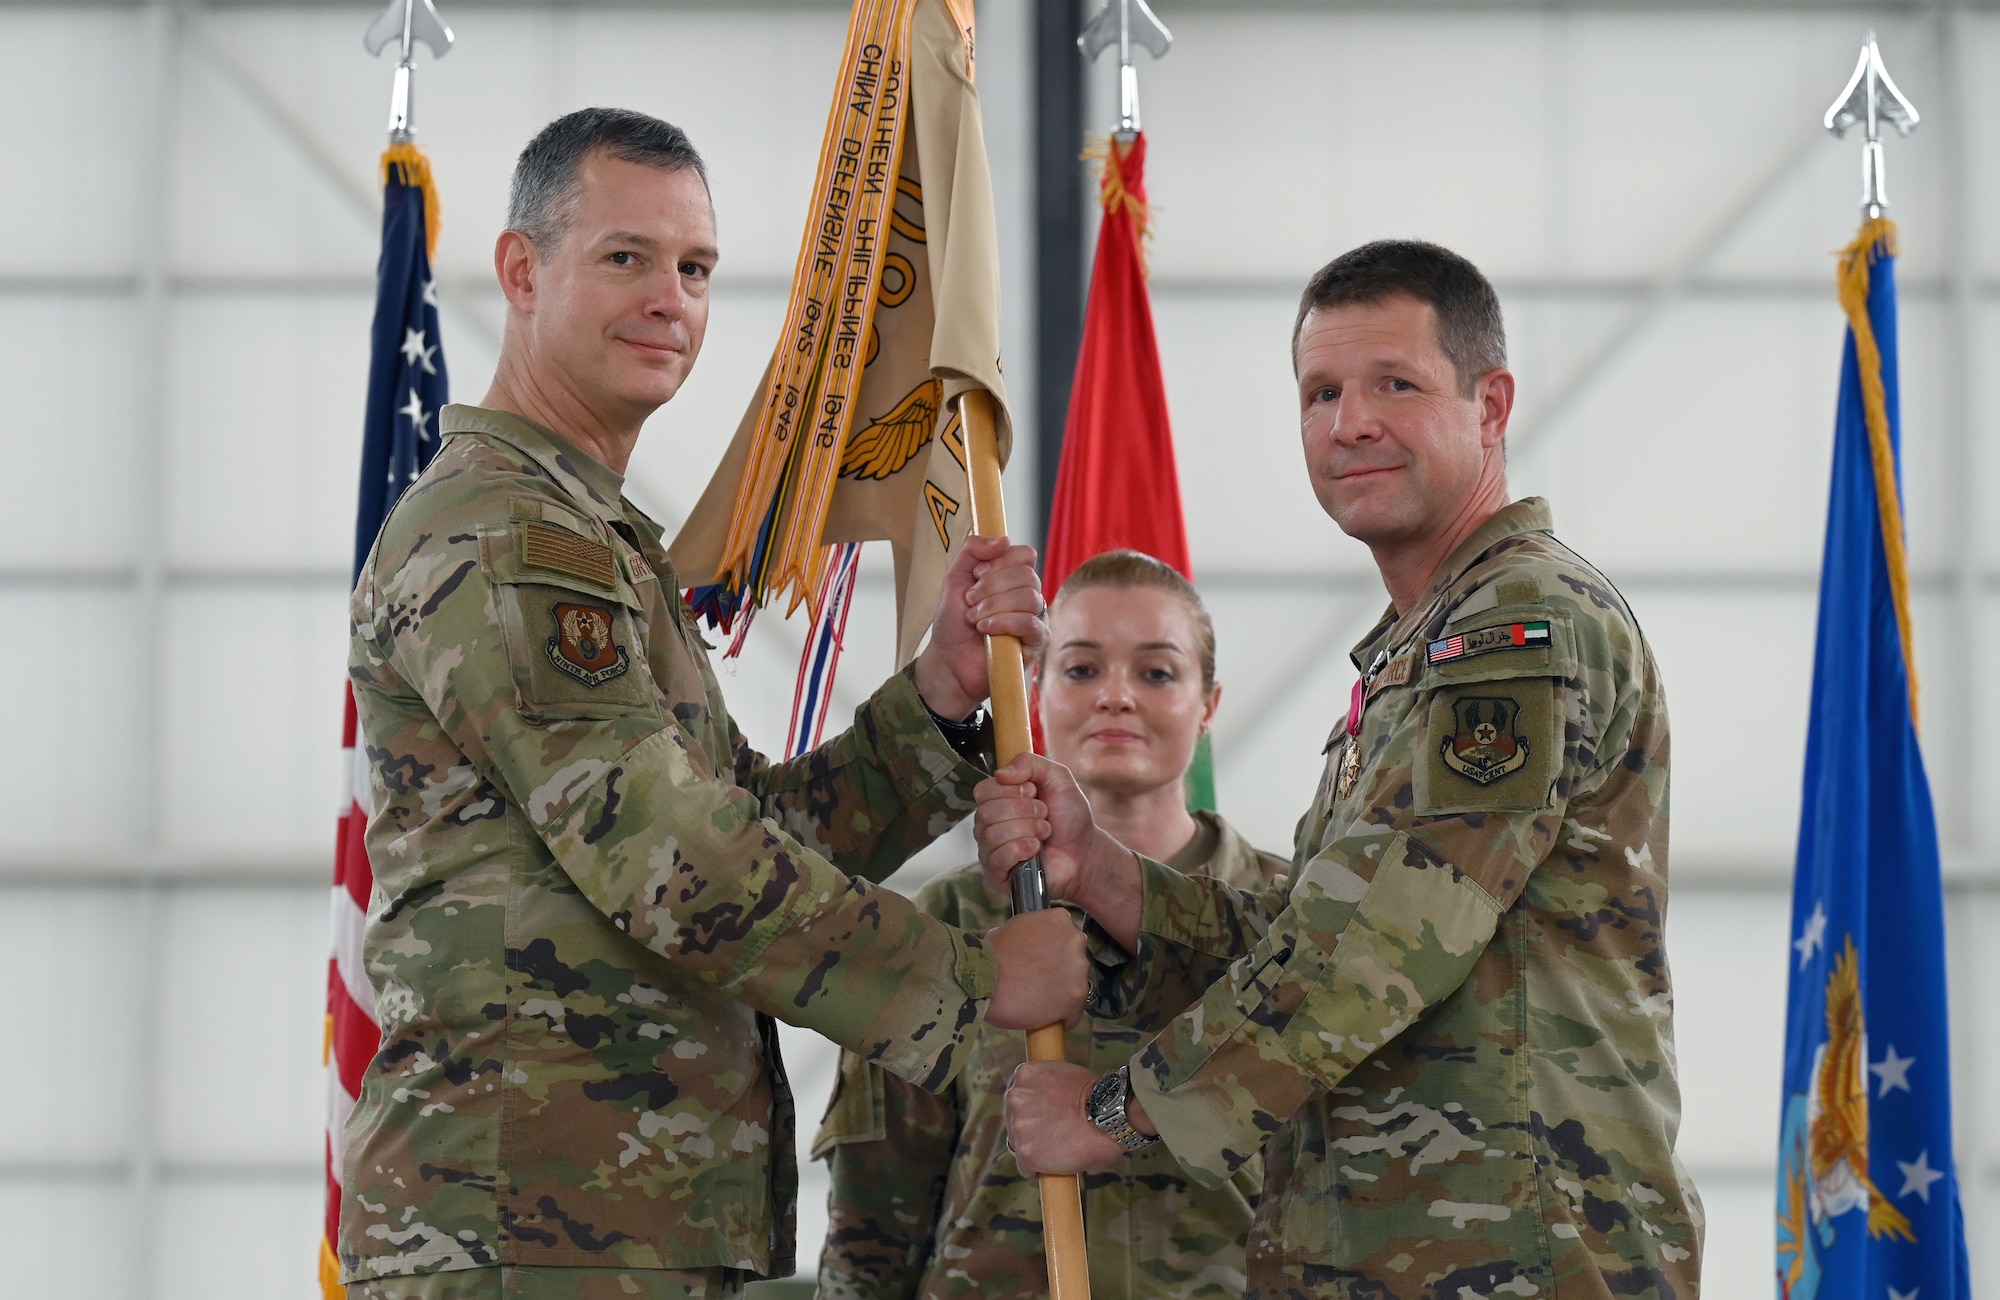 A photo of two people on stage holding the guidon.